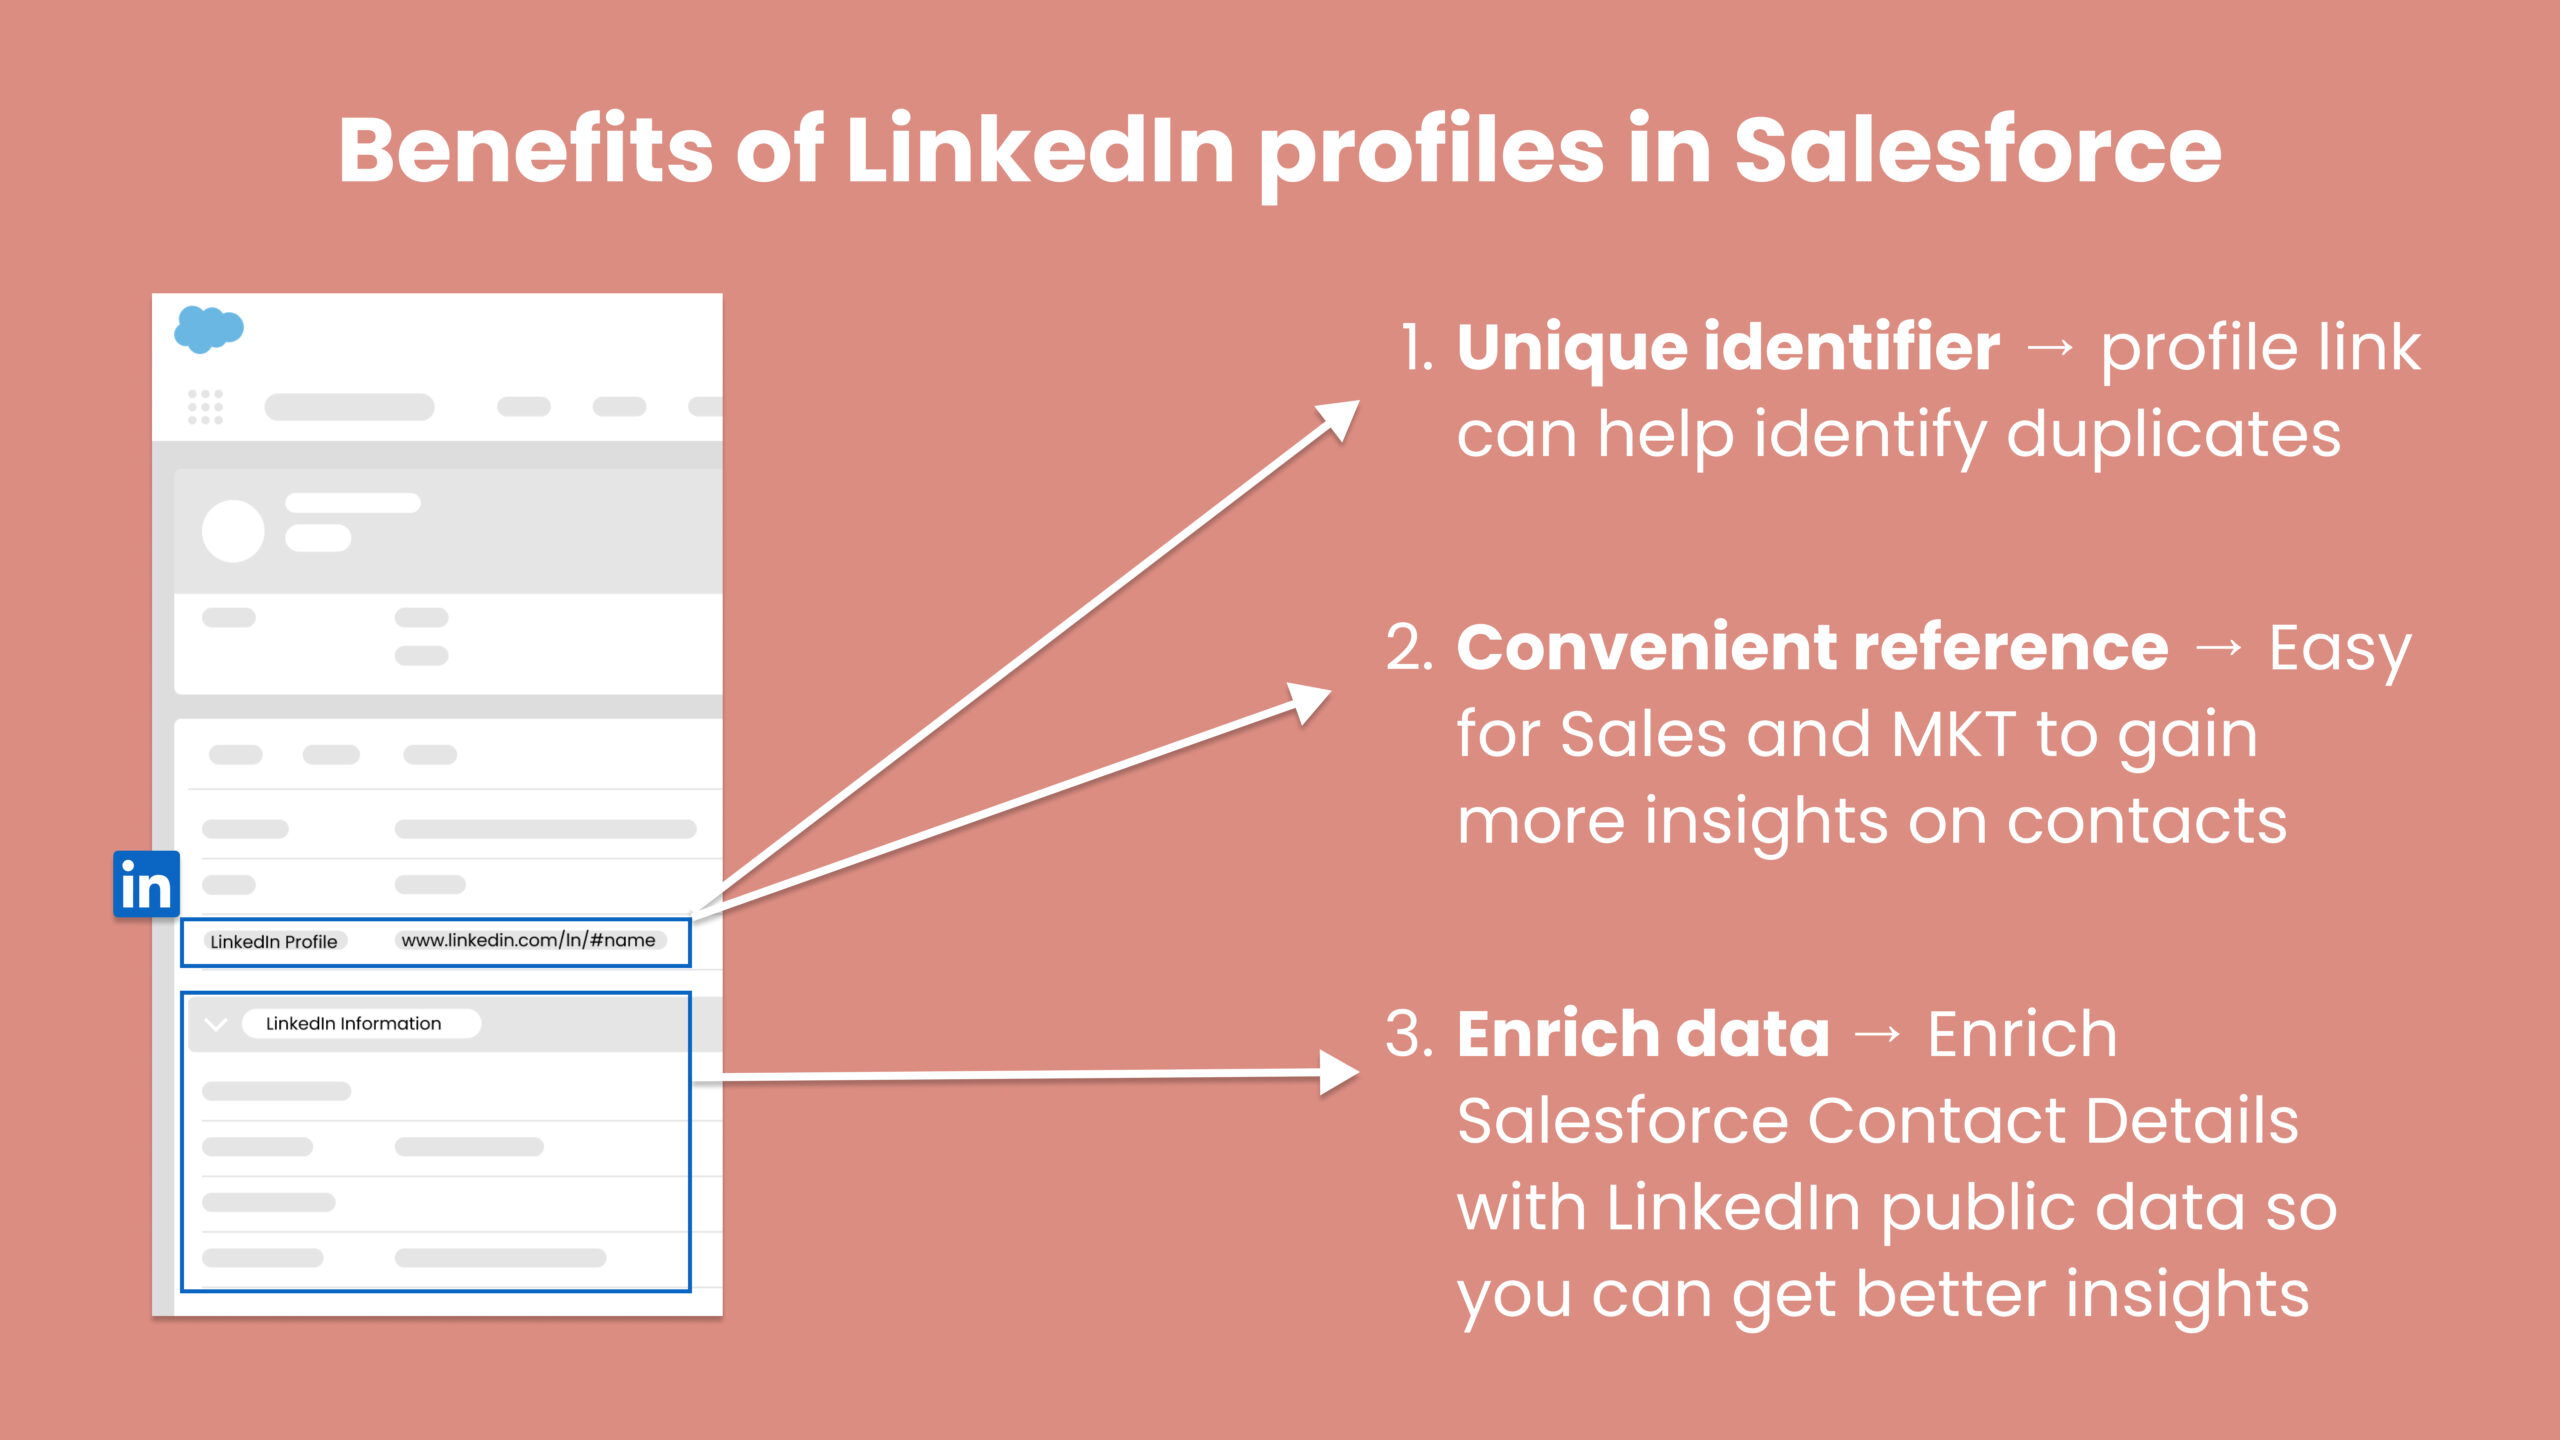 The benefits of adding LinkedIn profiles into salesforce is they can uniquely identify your contacts in the database, refer the user to more information, and enrich the contact’s details page.